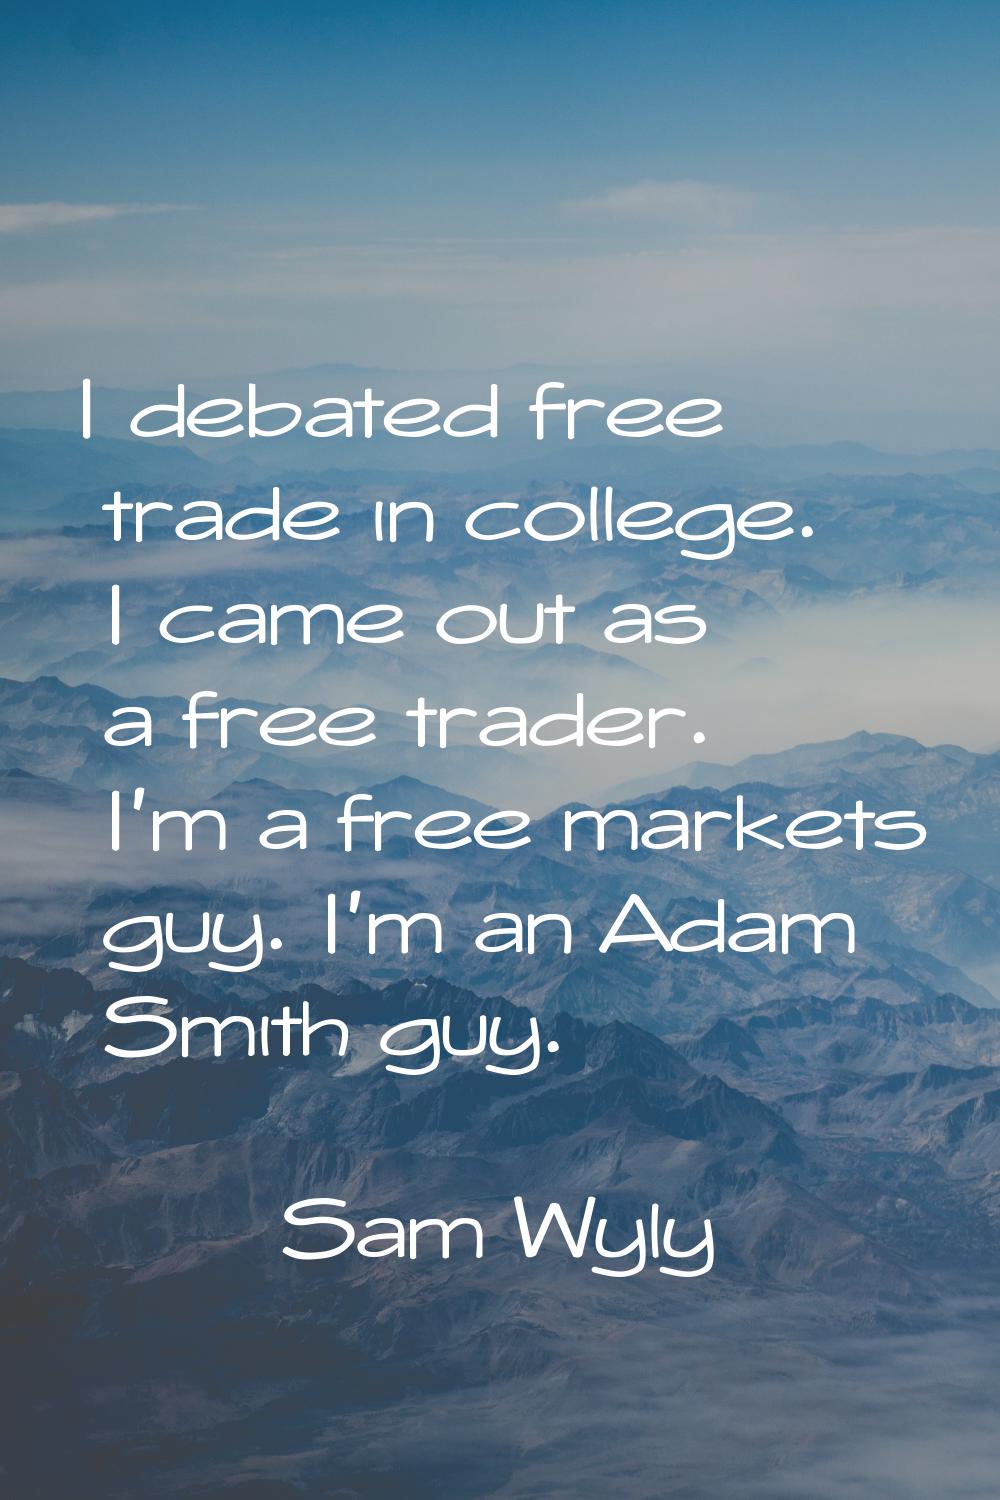 I debated free trade in college. I came out as a free trader. I'm a free markets guy. I'm an Adam S